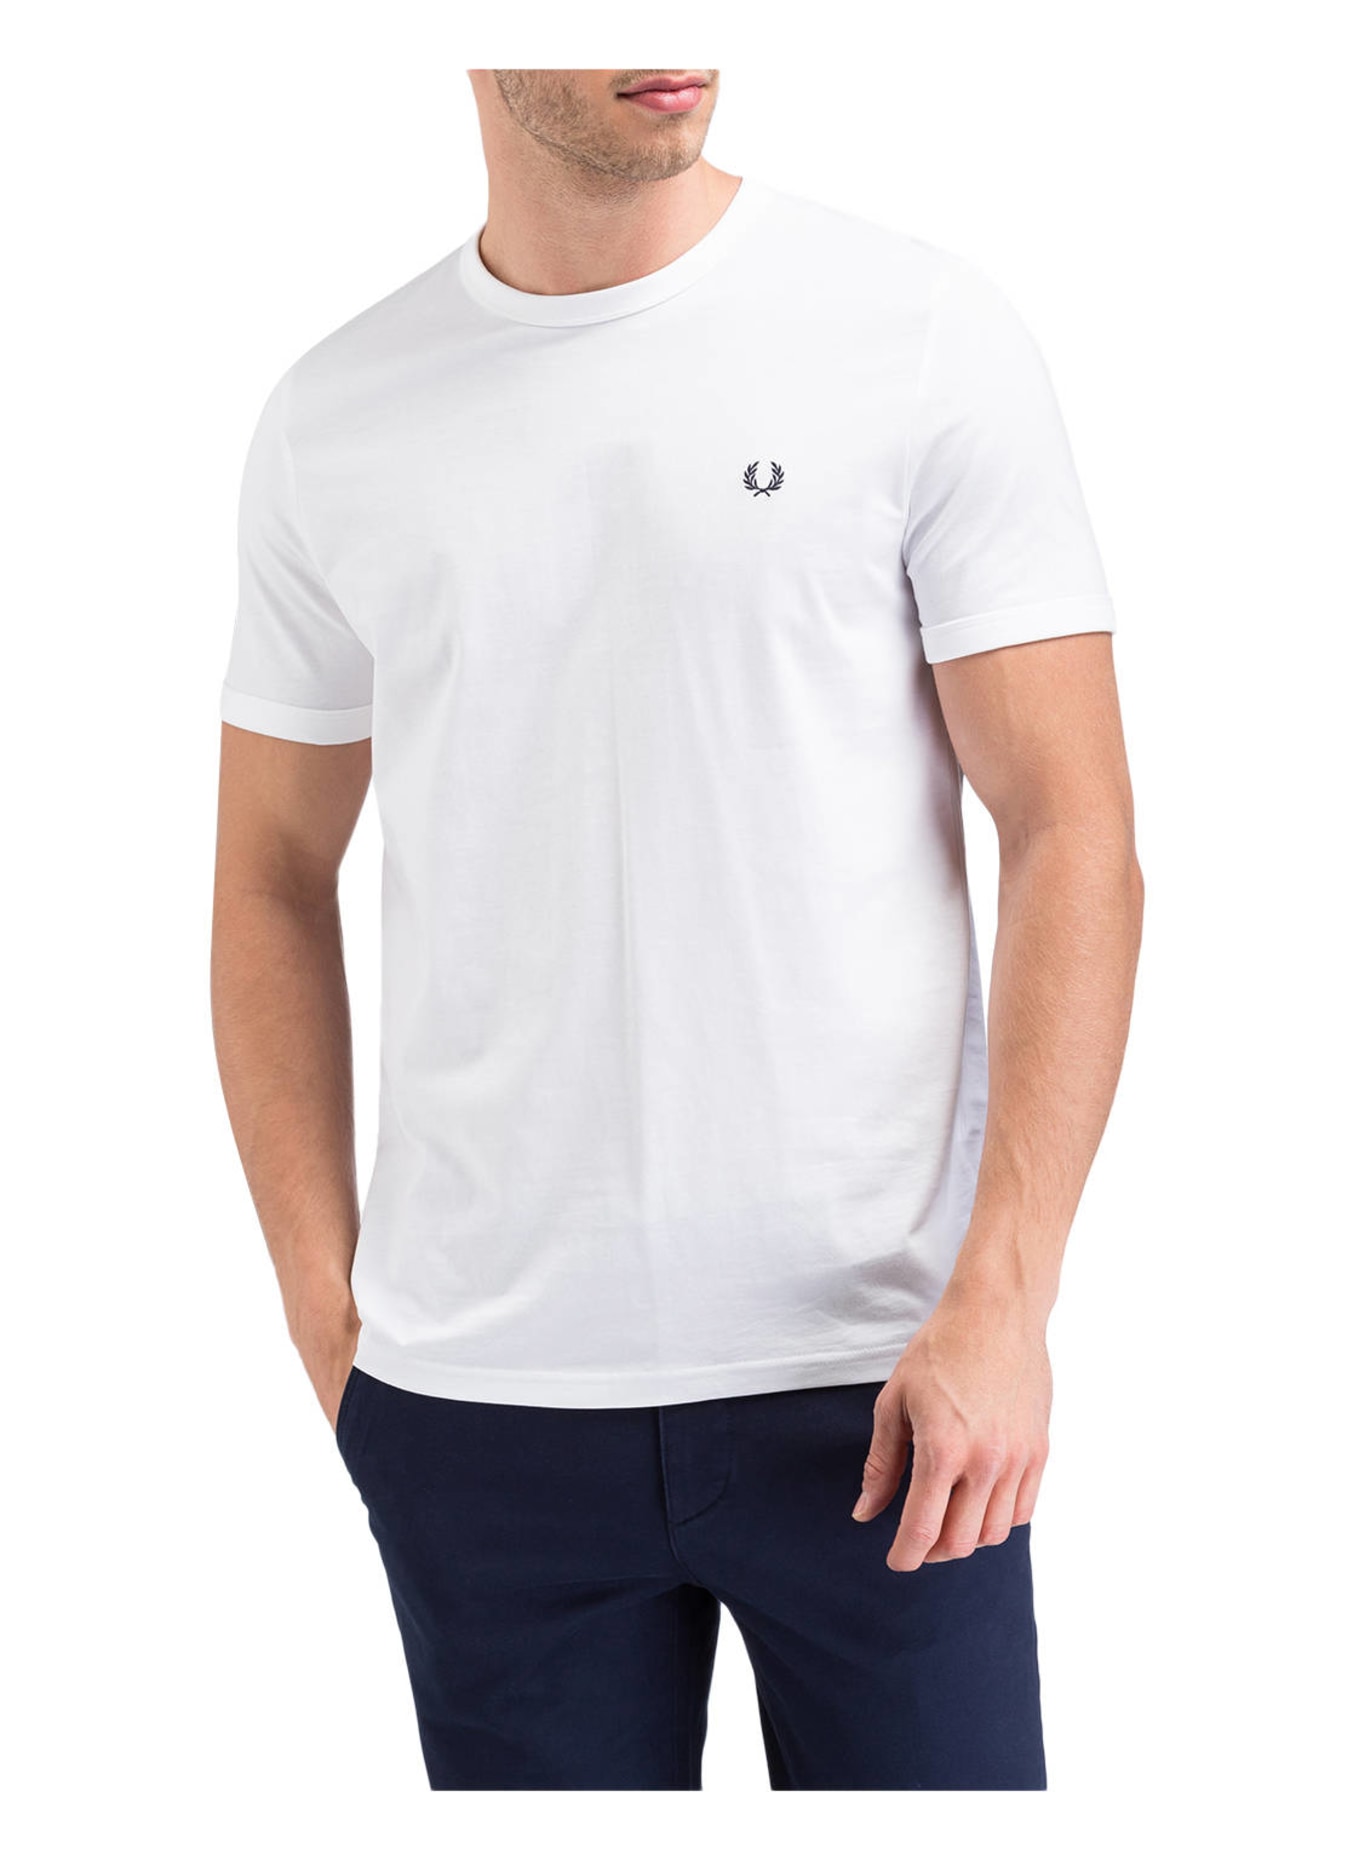 FRED PERRY T-Shirt RINGER, Farbe: WEISS (Bild 2)